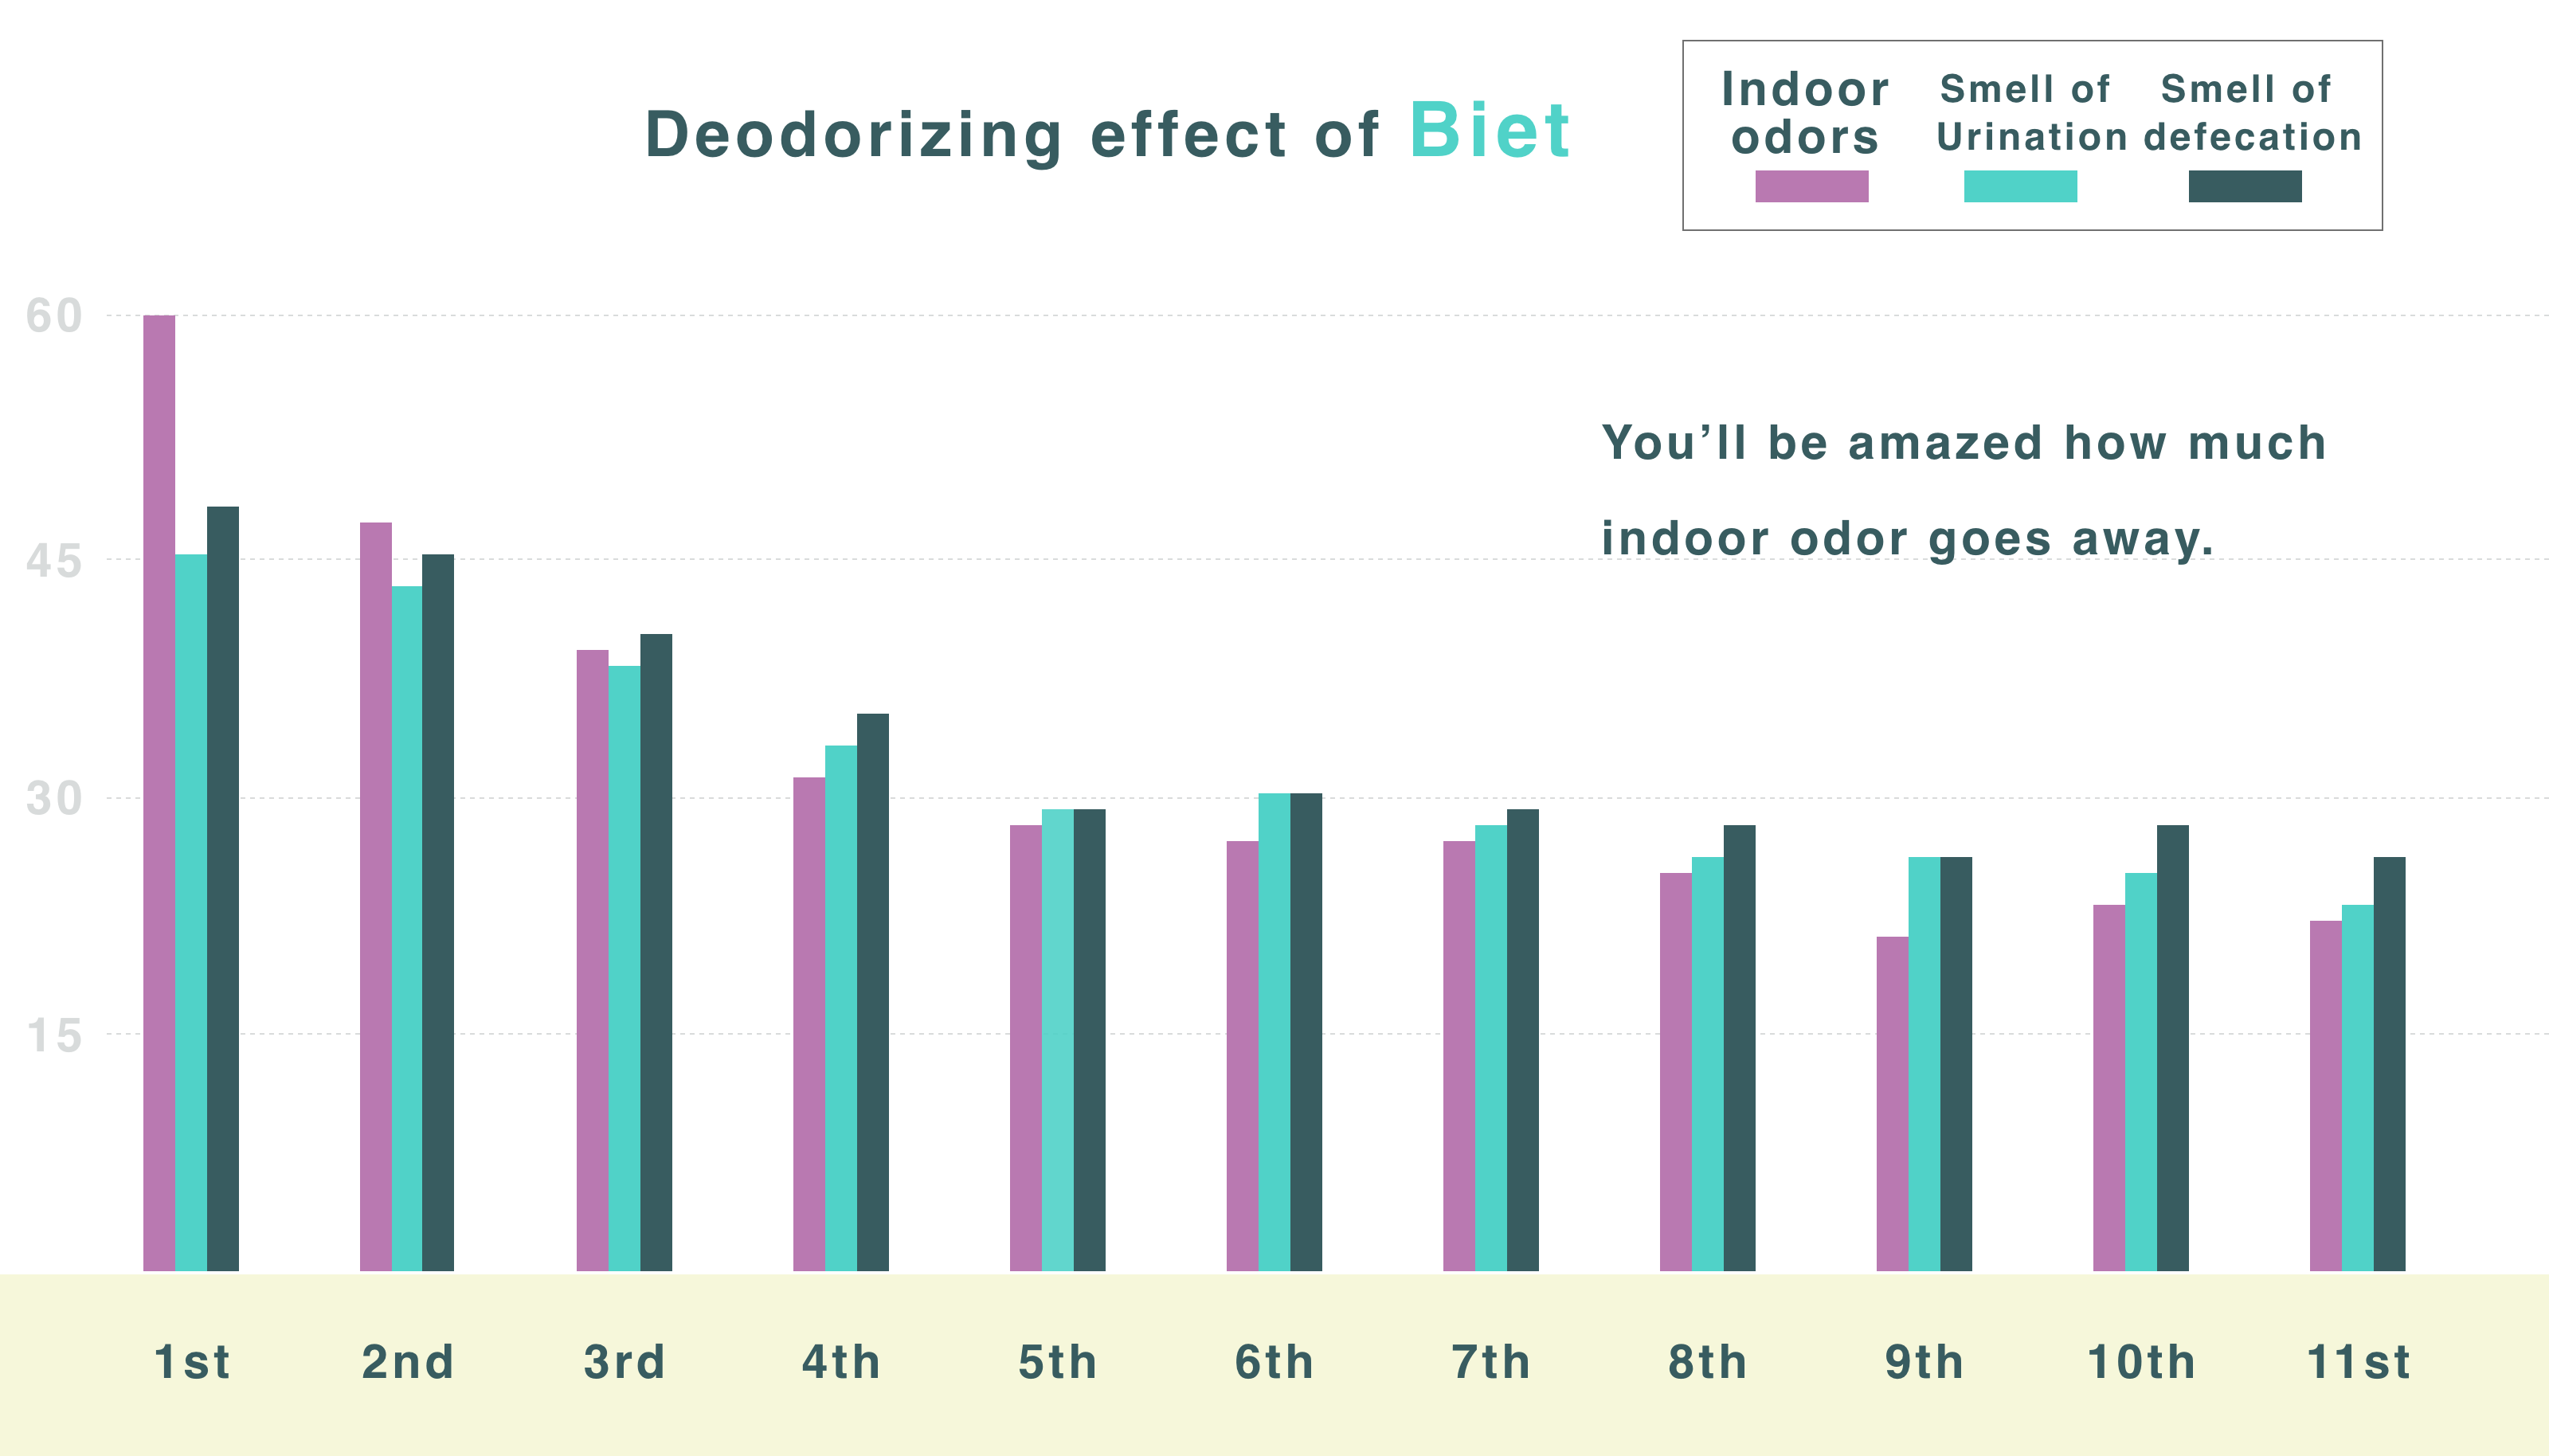 Biet deodorizing effect graph - After 11 days, the indoor odor is surprisingly eliminated